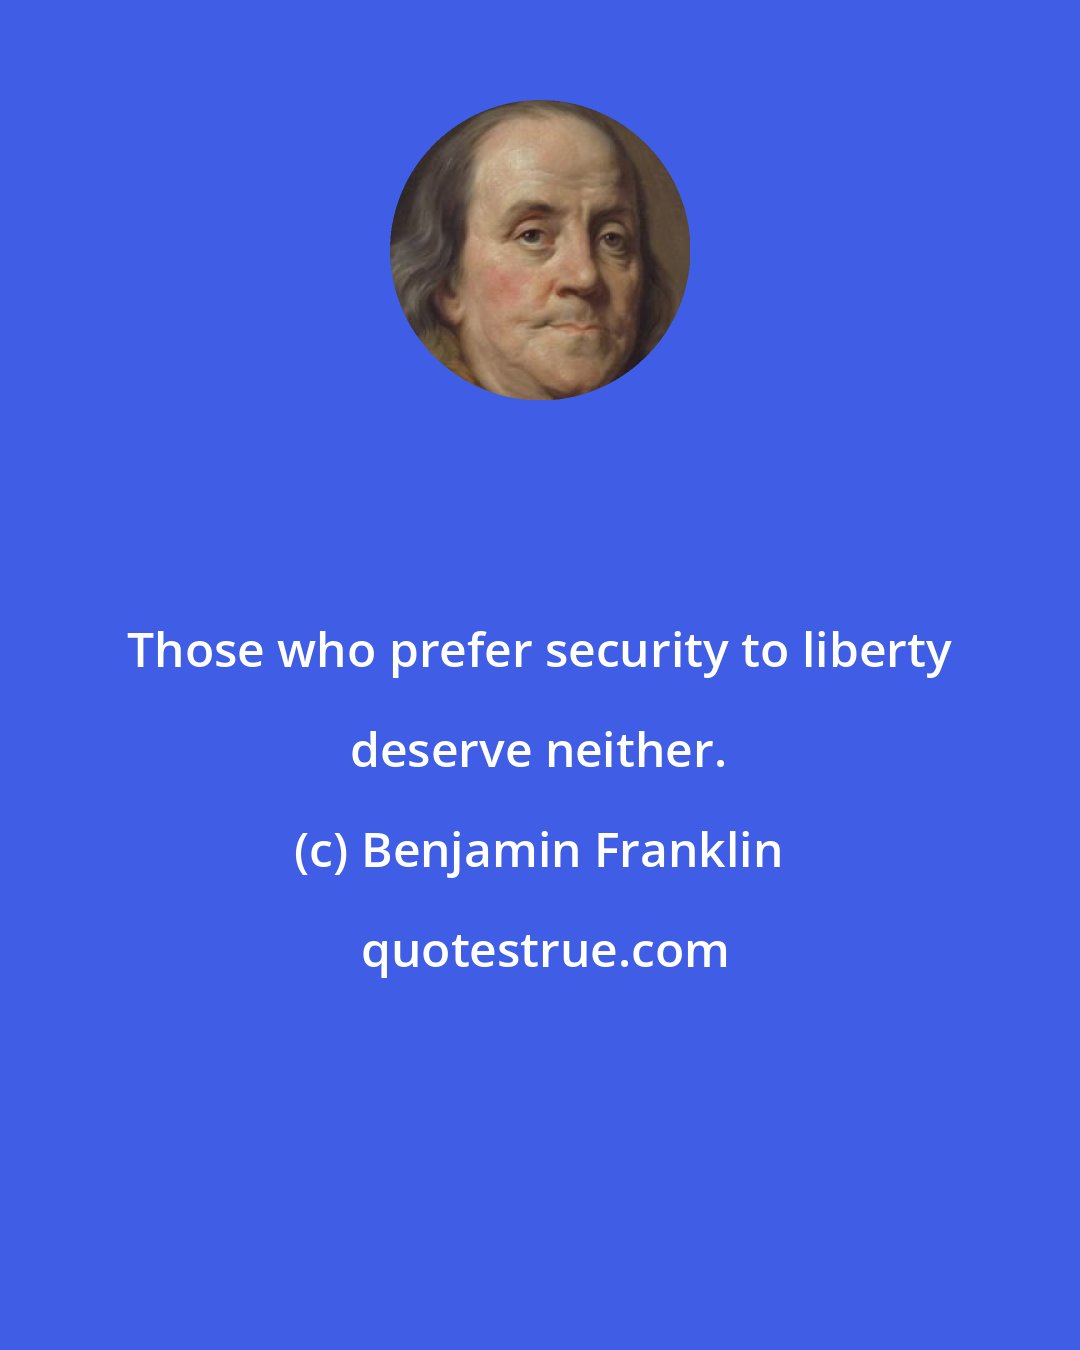 Benjamin Franklin: Those who prefer security to liberty deserve neither.